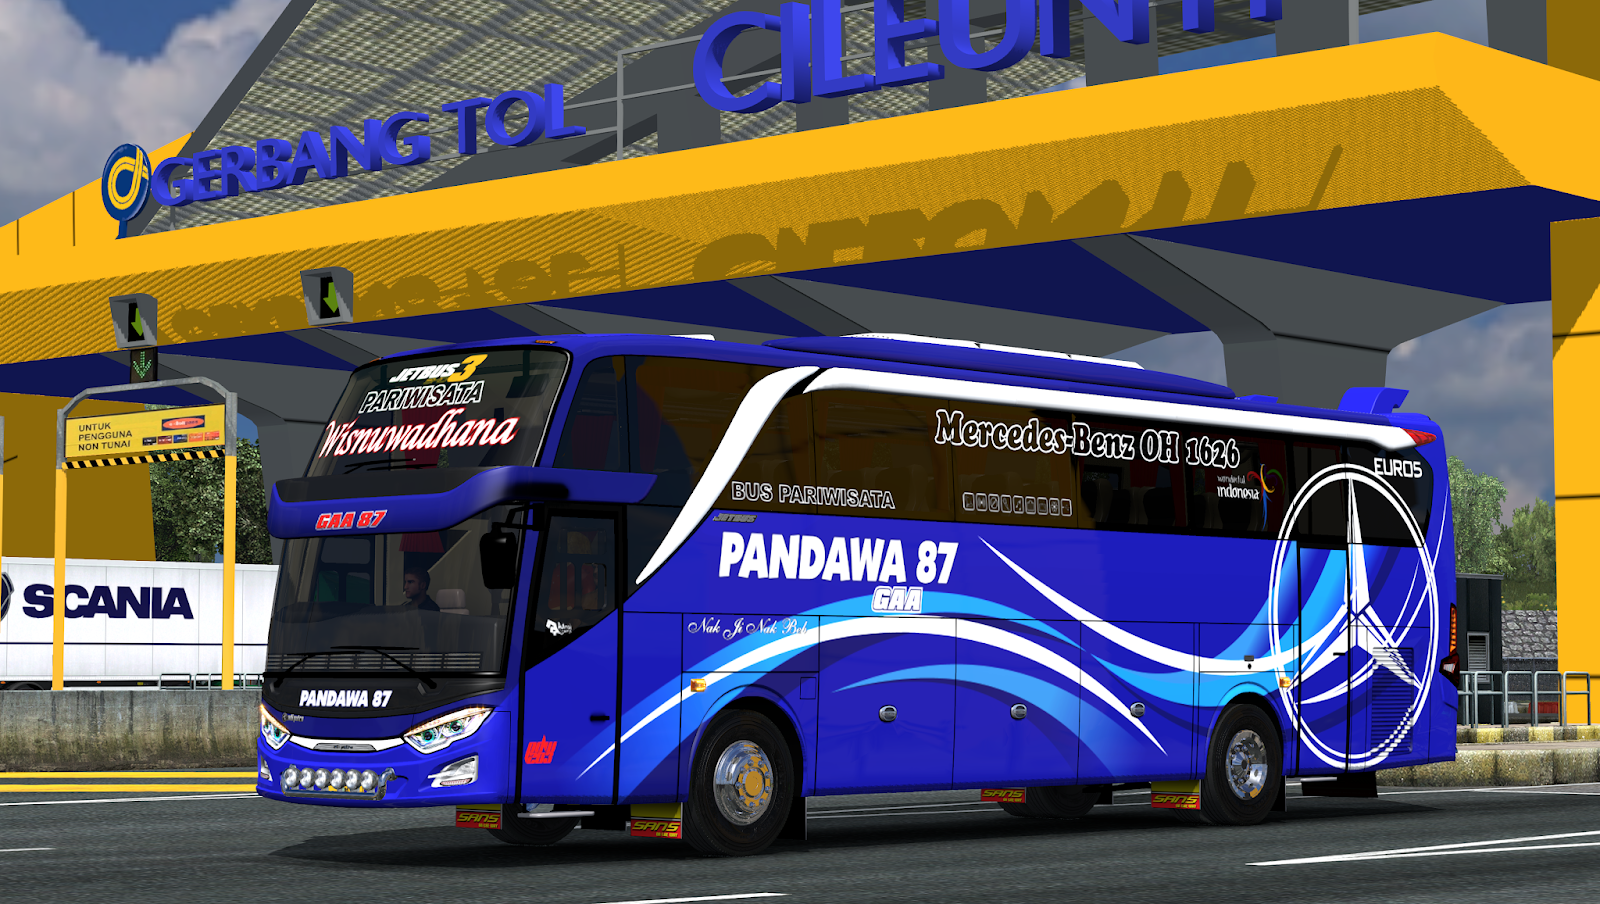 Wallpaper Bus Indonesia Part 1 Mod Ets2 Indonesia